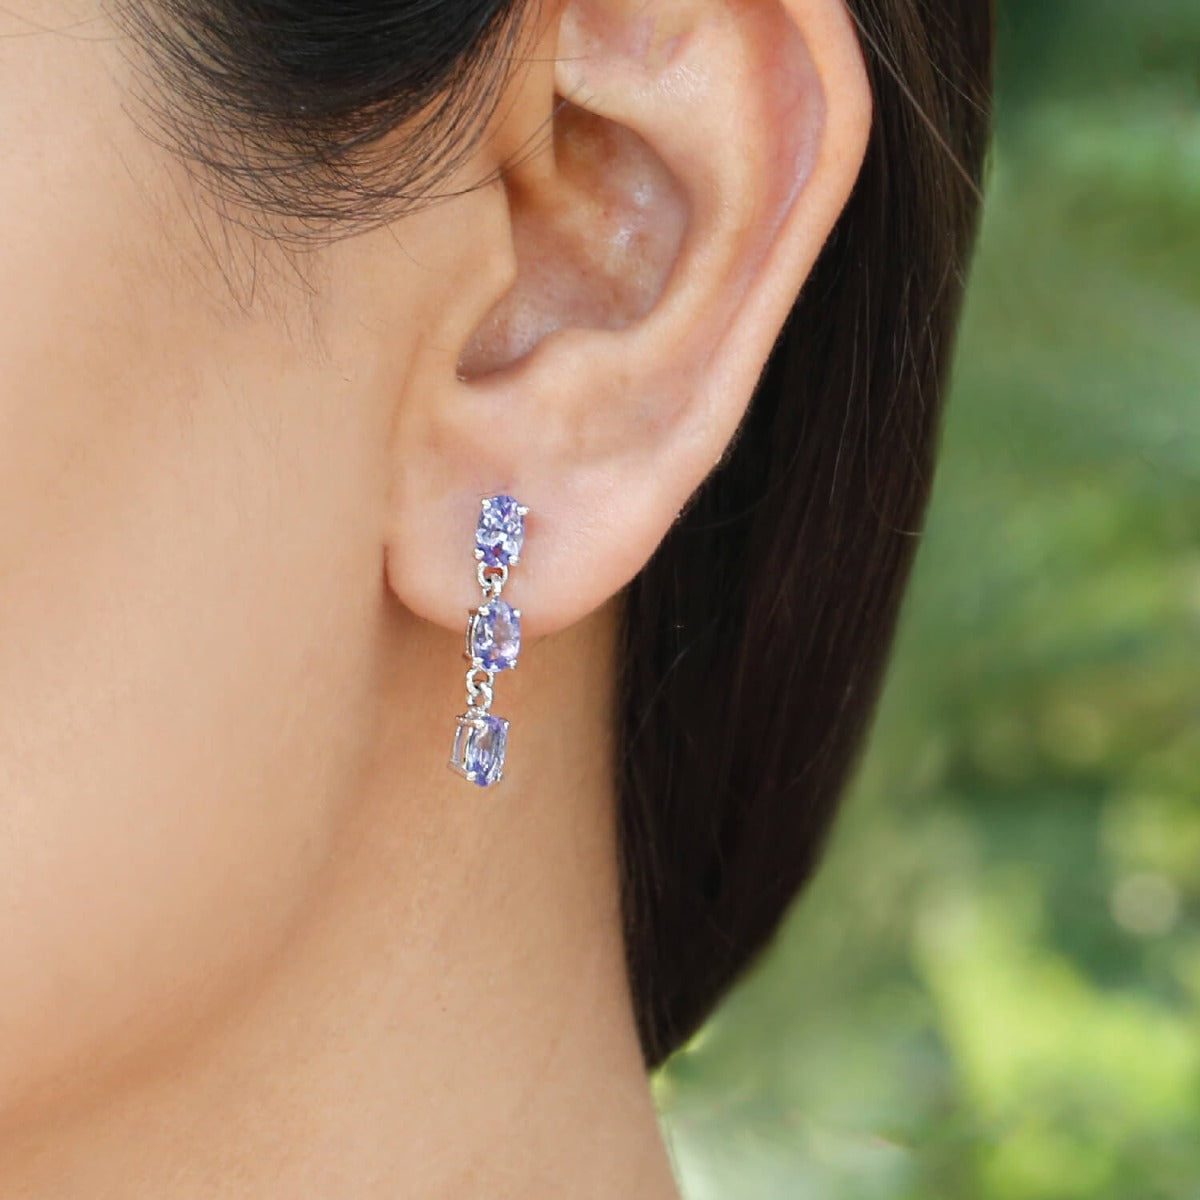 Exquisite Tanzanite Silver 925 Earrings